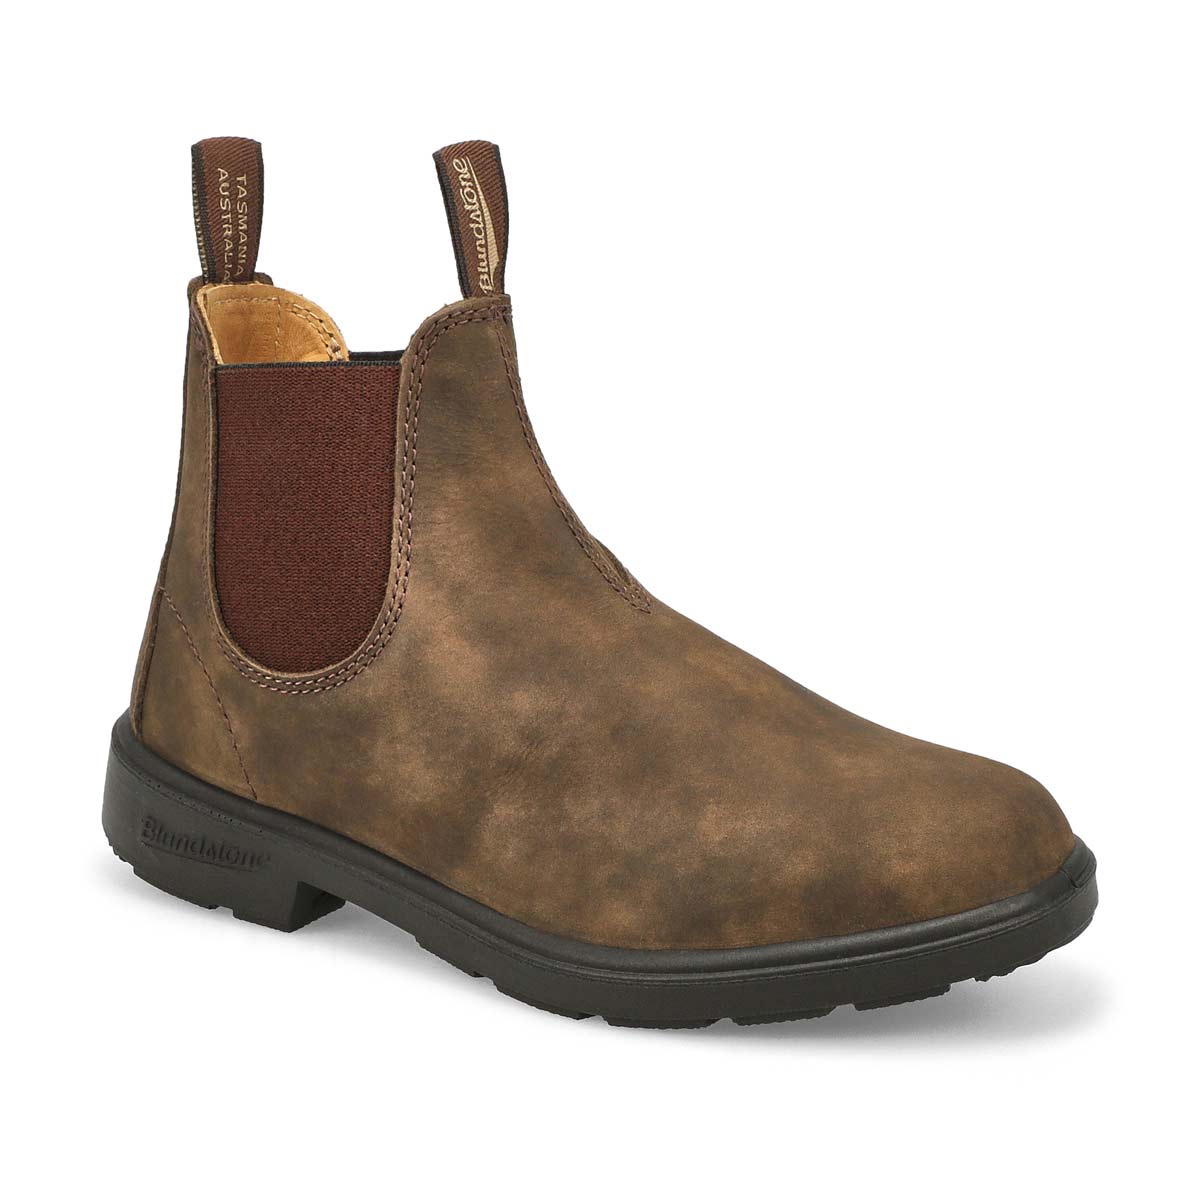 price of blundstone boots